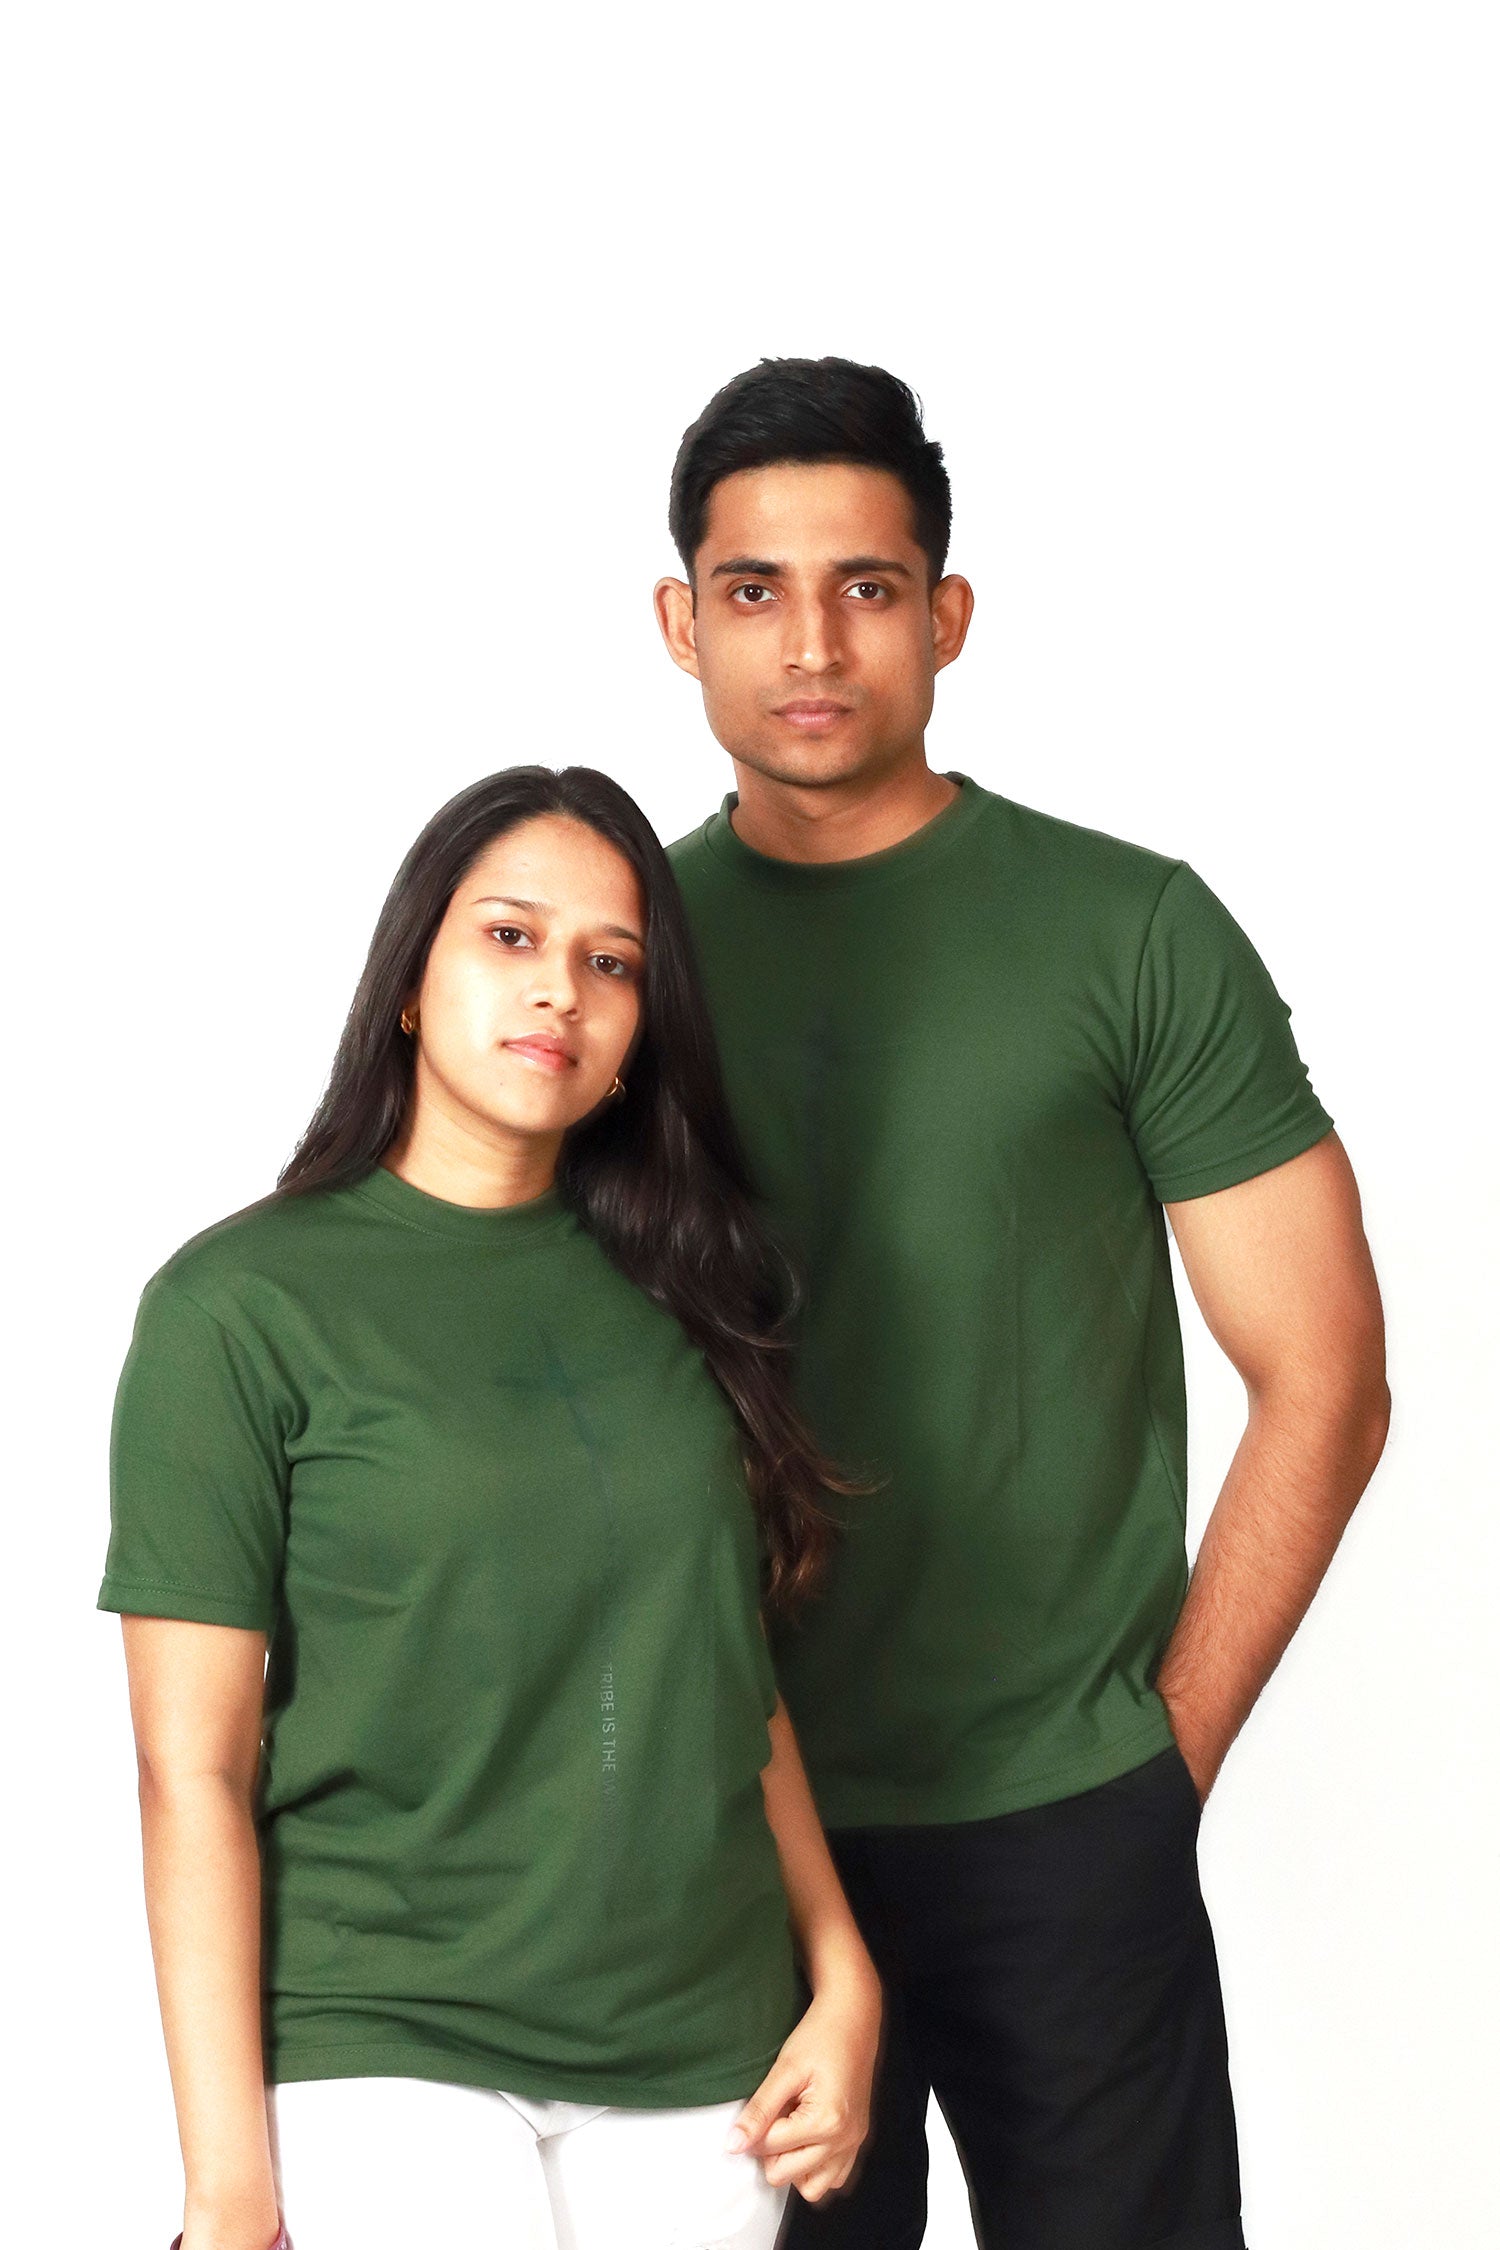 The Lion's Tribe is the Winning Tribe - Dark Olive Green - Unisex